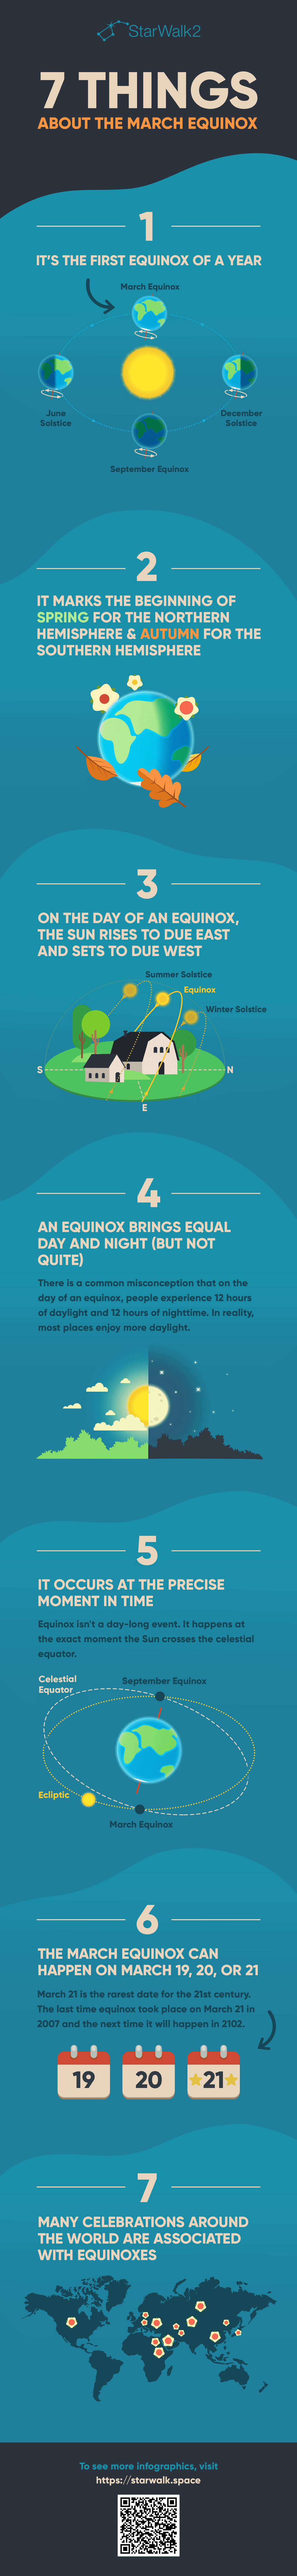 7 Things About the March Equinox